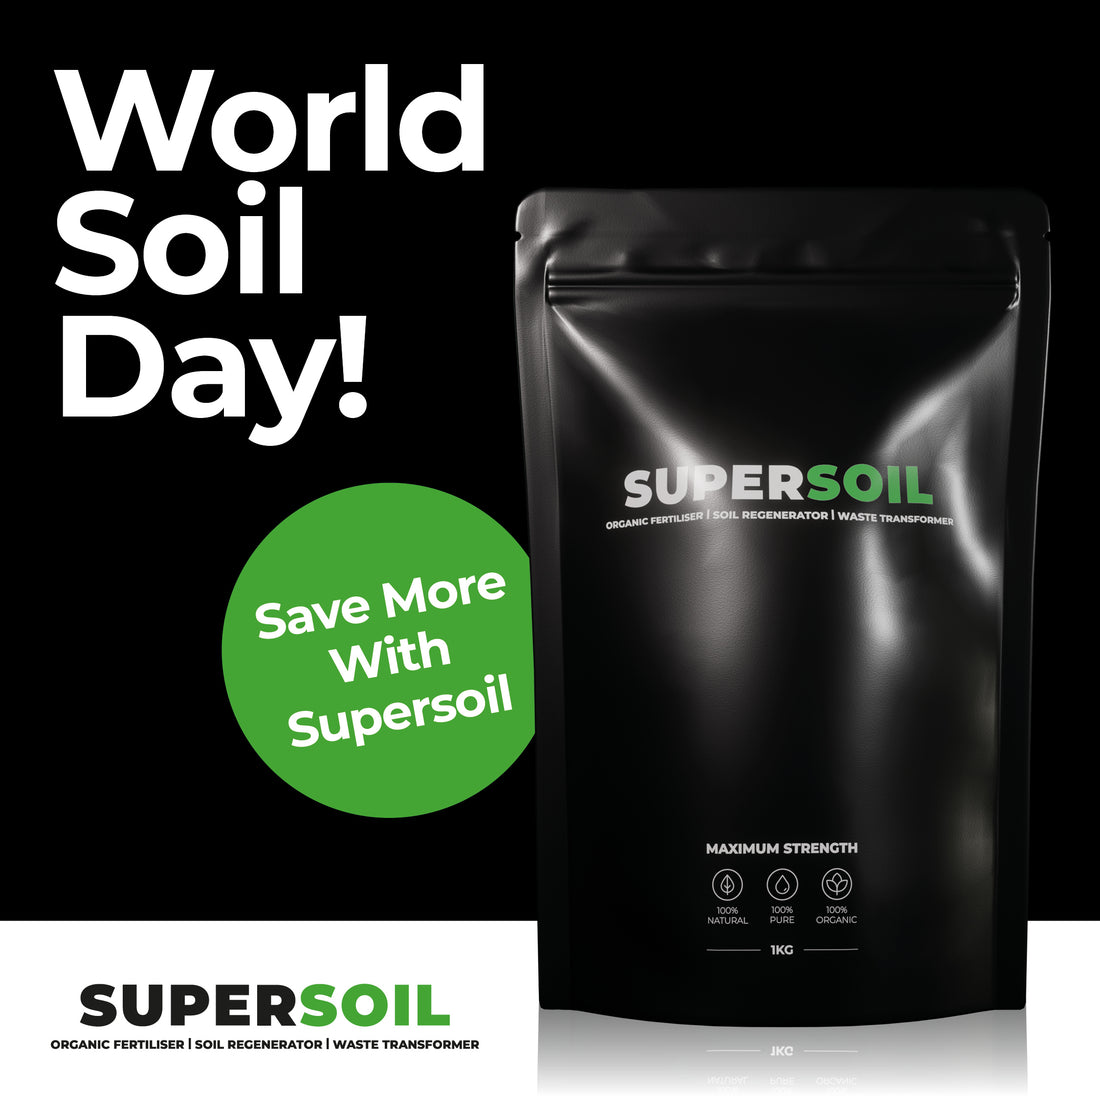 Why SUPERSOIL?